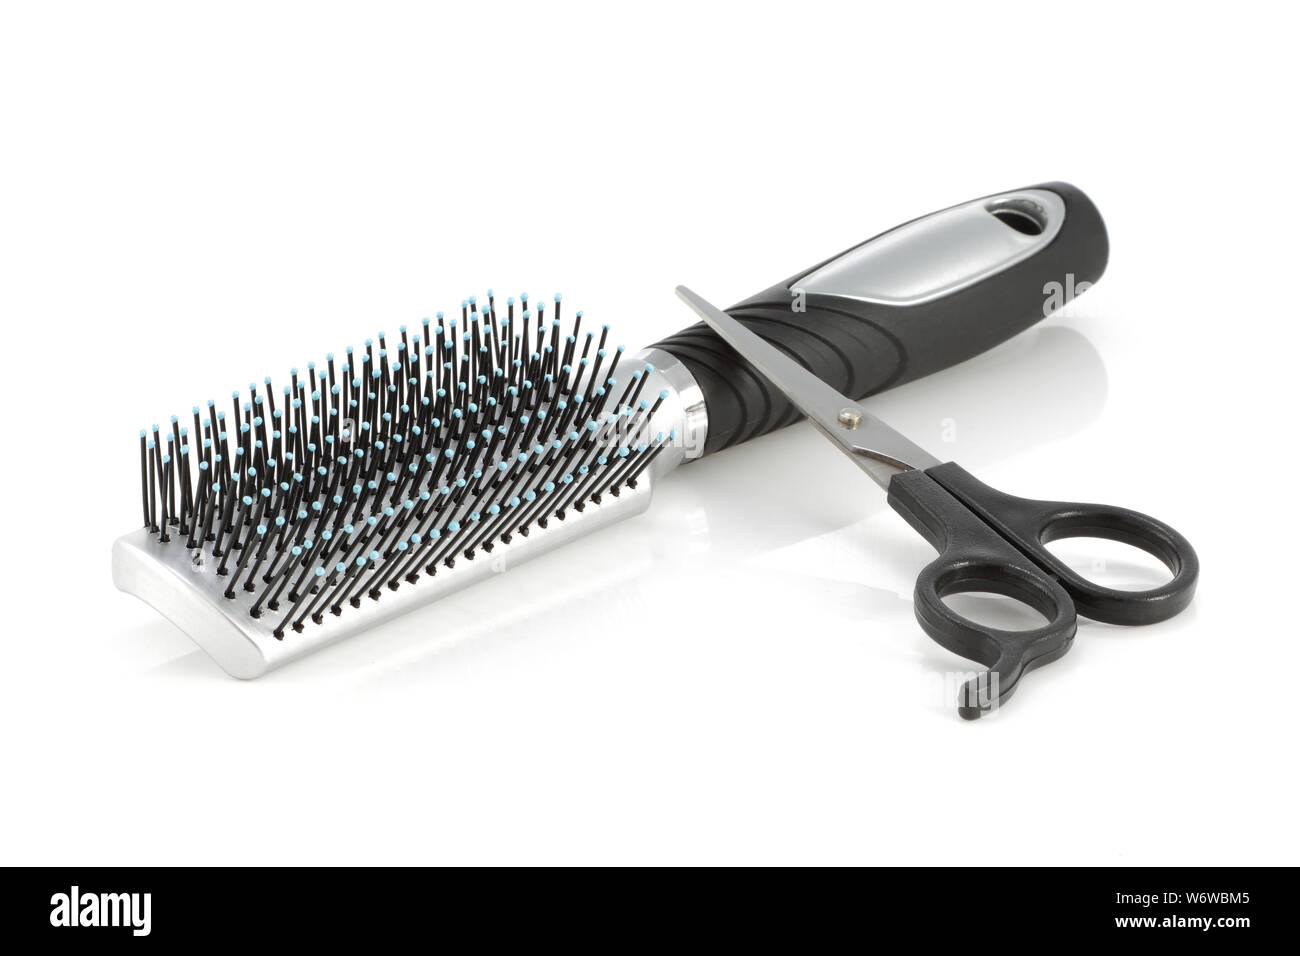 A hair brush and scissors isolated on white Stock Photo